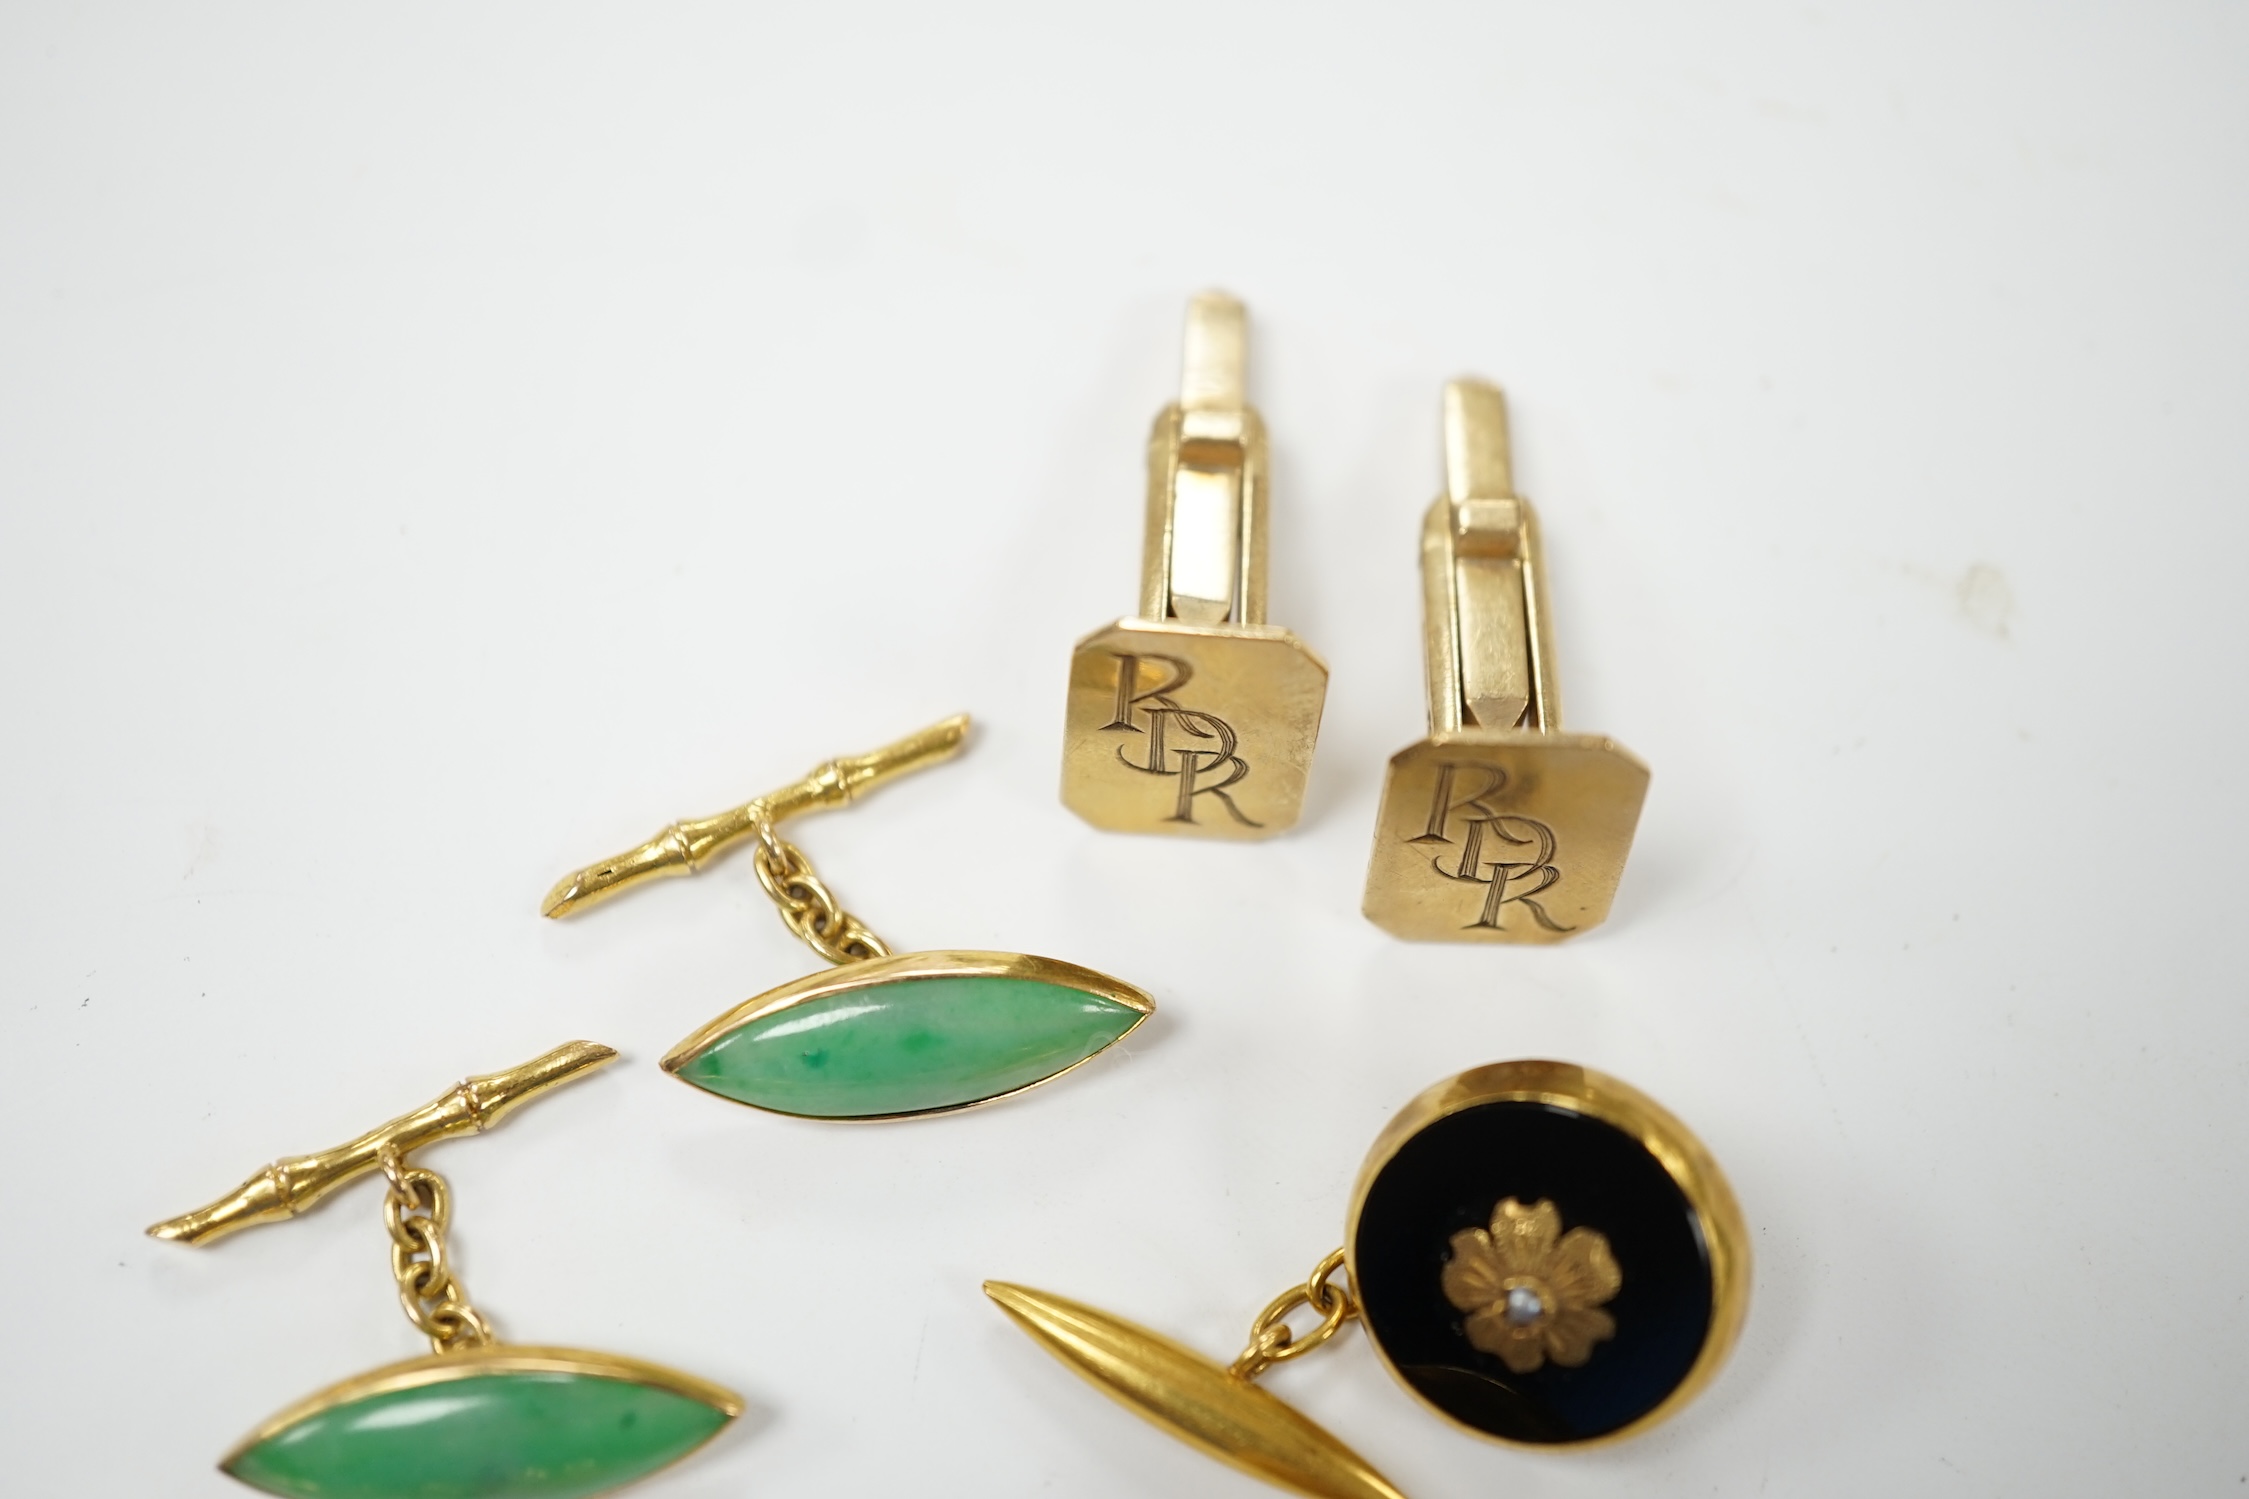 A pair of Edwardian 15ct gold torpedo shaped cufflinks, 9,6 grams and three other pairs of cufflinks including Chinese jade and monogrammed 9ct gold. Fair to good condition.